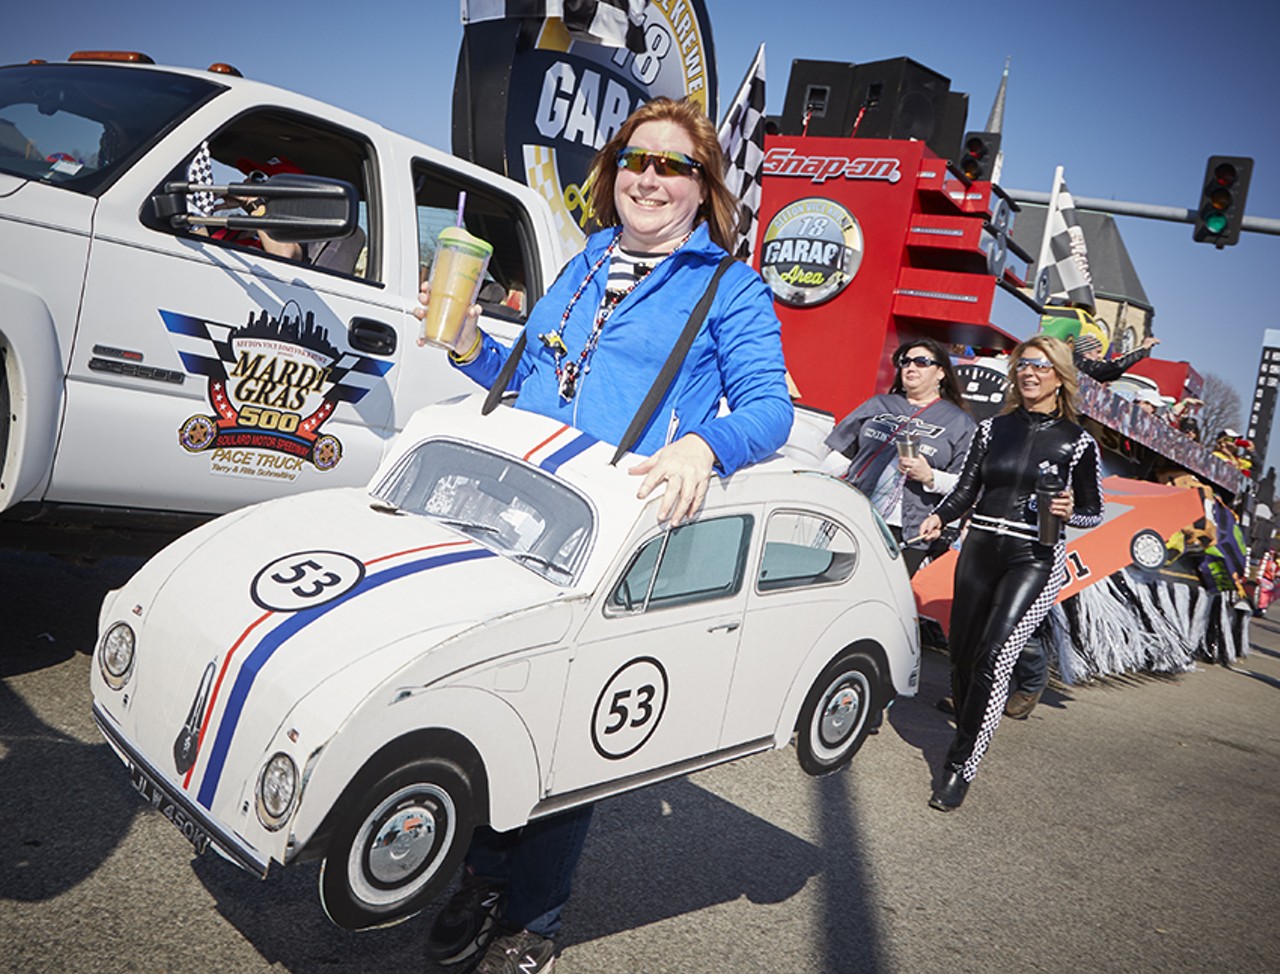 Herbie the Lovebug! Too bad a drink holder wasn't included....